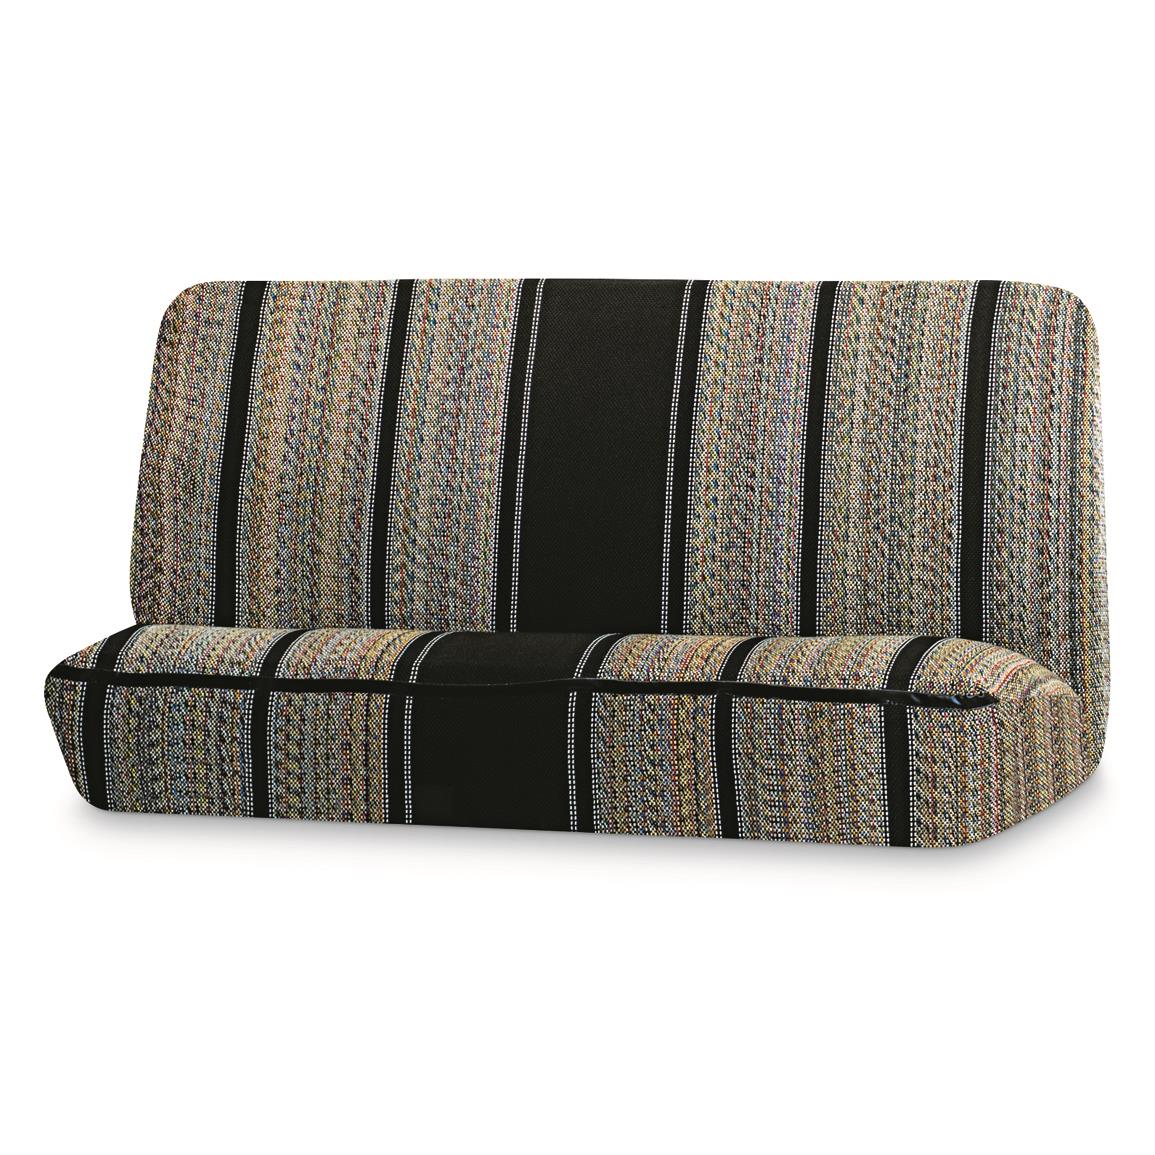 Custom Covers Saddle Blanket Vehicle Bench Seat Cover